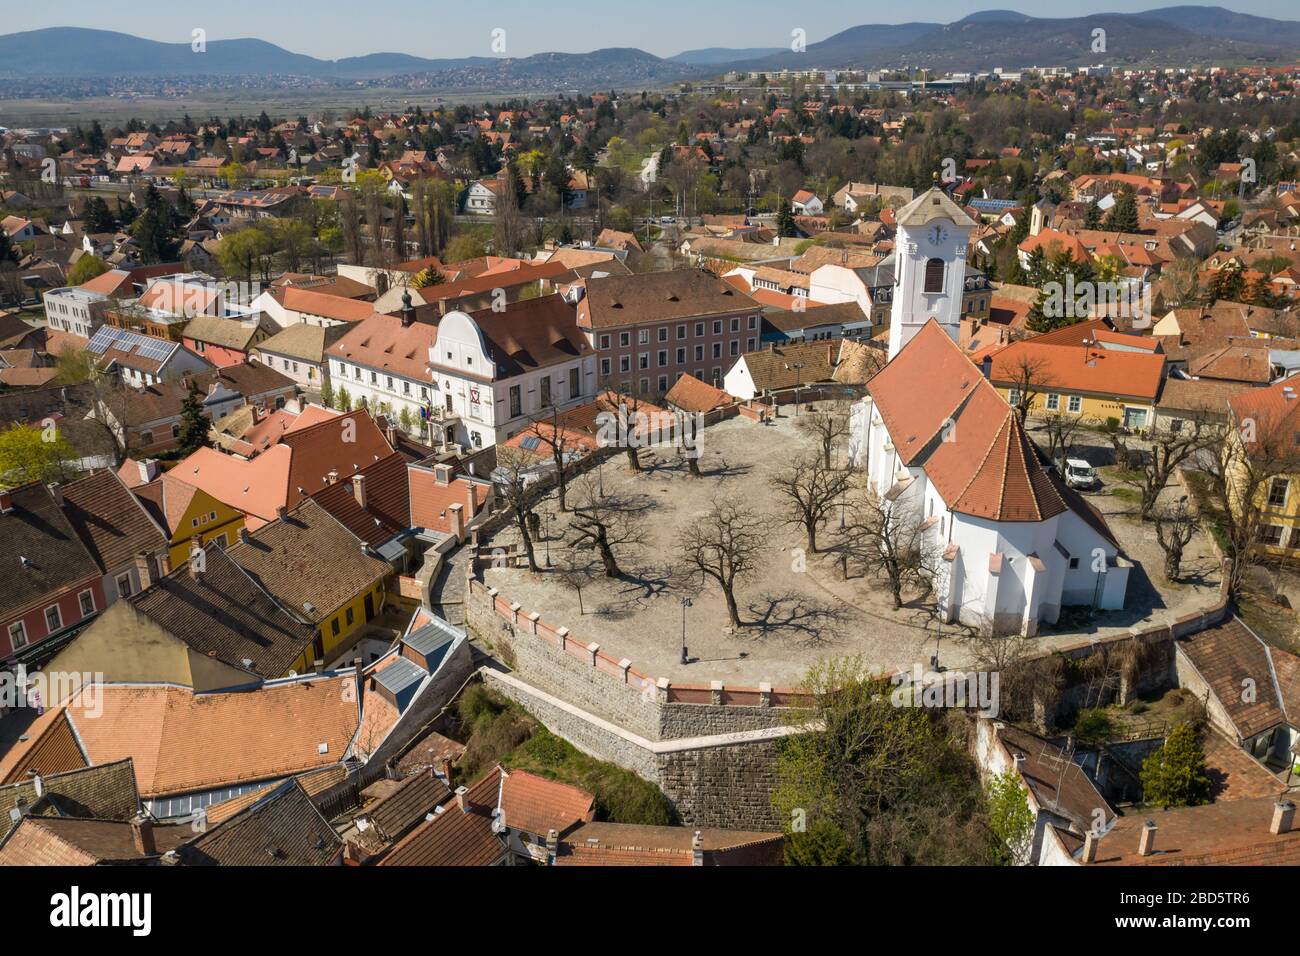 Empty tourist destination in Szentendre, Hungary. Normally full of tourists and bazaars. Travel industry, tourism stopped in Europe (coronavirus) Stock Photo